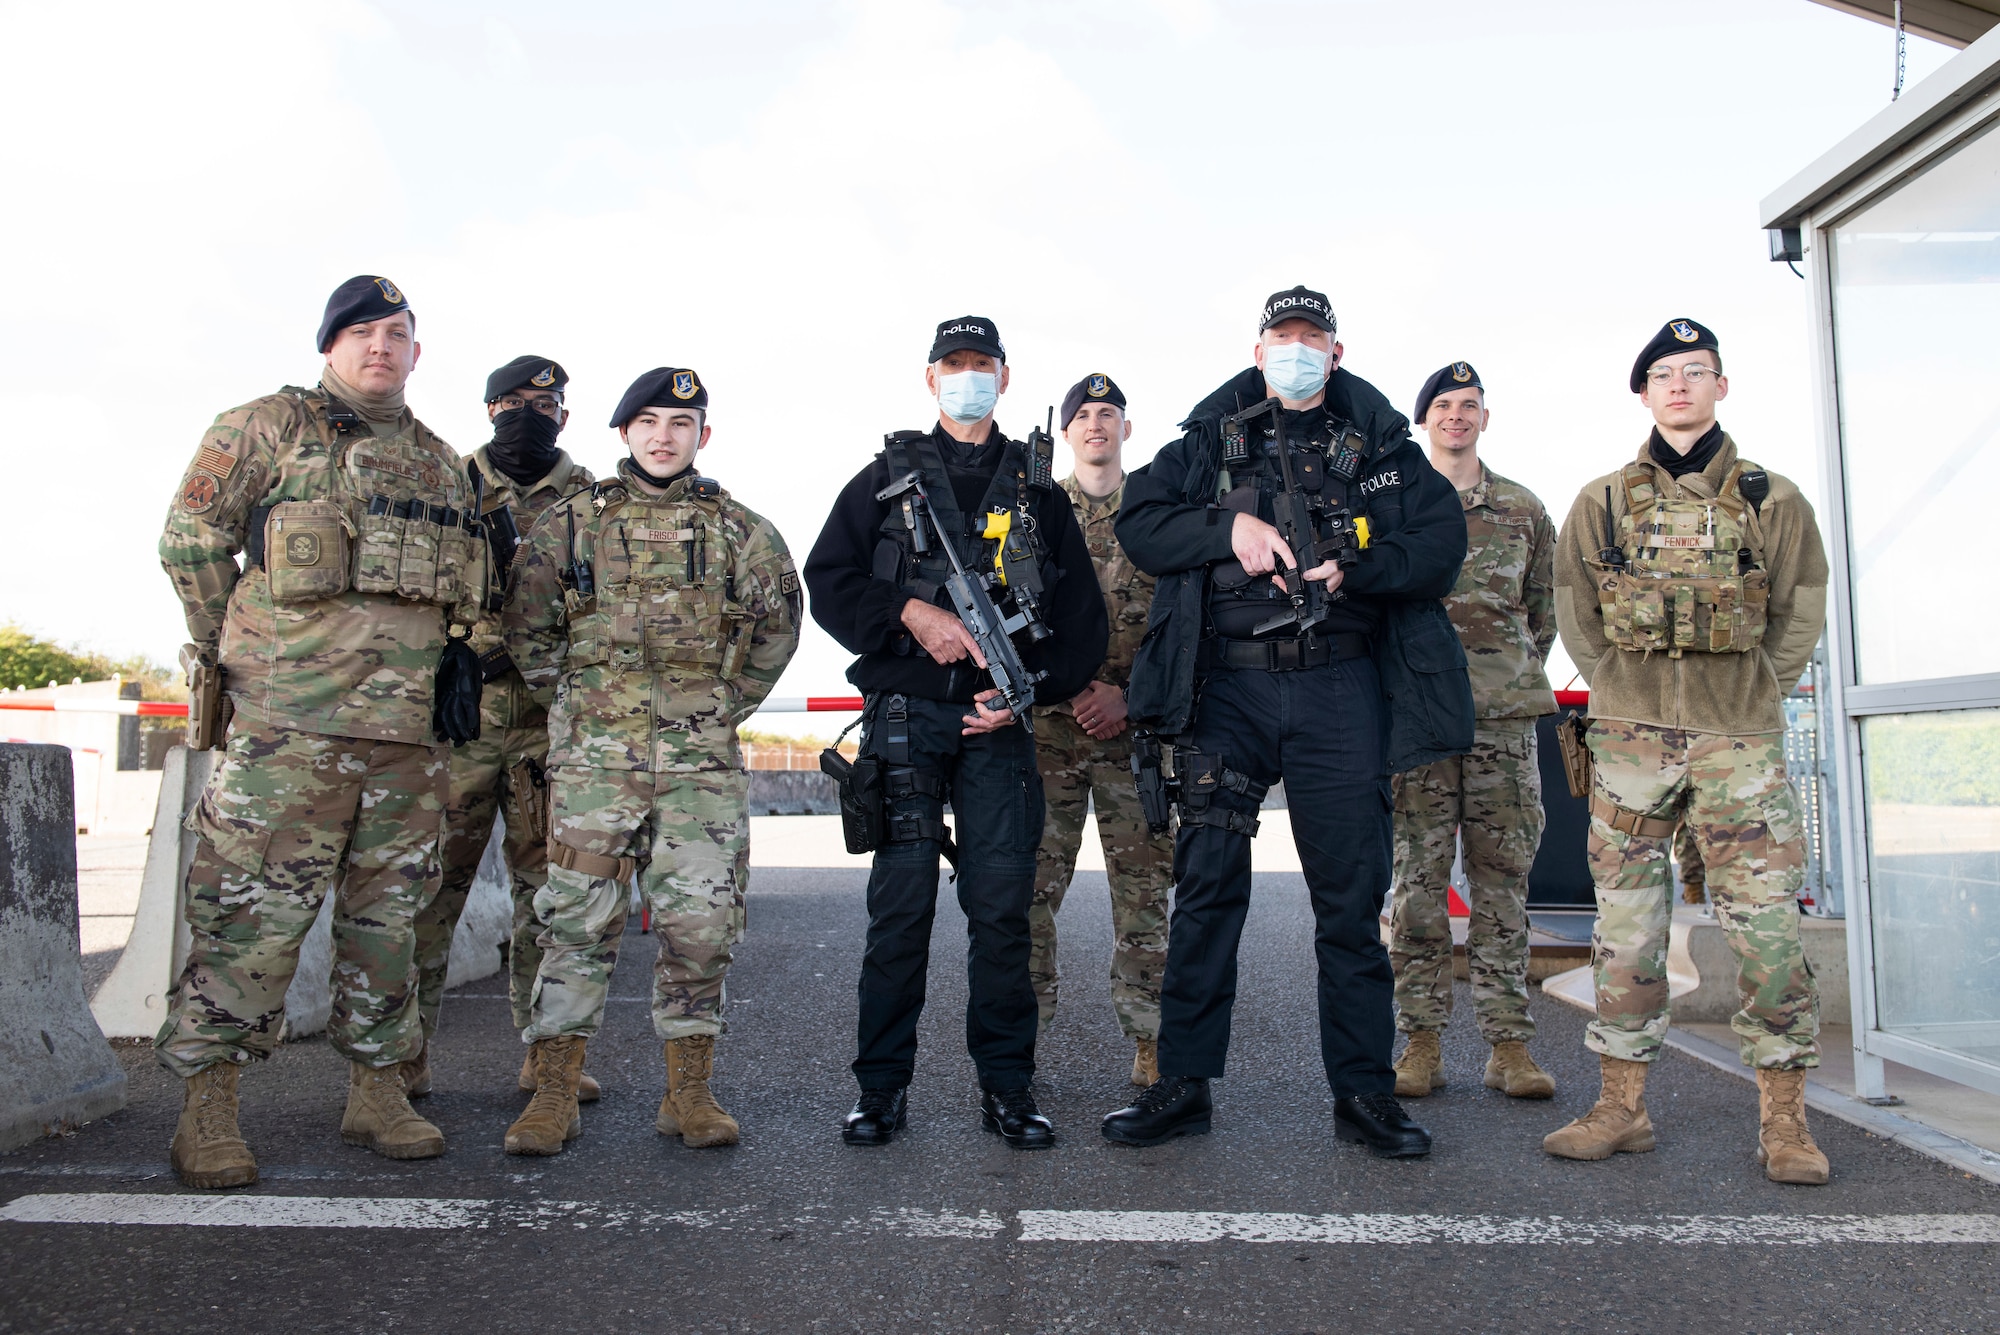 U.S. Air Force Airmen from the 423rd Security Forces Squadron pose for a group photo with the Ministry of Defence police at Royal Air Force Molesworth, England, Sept. 29, 2021. The AFIMSC leadership visited the 501st Combat Support Wing and its mission partners at the U.S. European Command Joint Intelligence Operations Center Europe Analytic Center at RAF Molesworth, England. The AFIMSC provides base communications, civil engineering, security forces and logistics support that assist the 501st CSW in fulfilling its mission. (U.S. Air Force photos by Senior Airman Jennifer Zima)